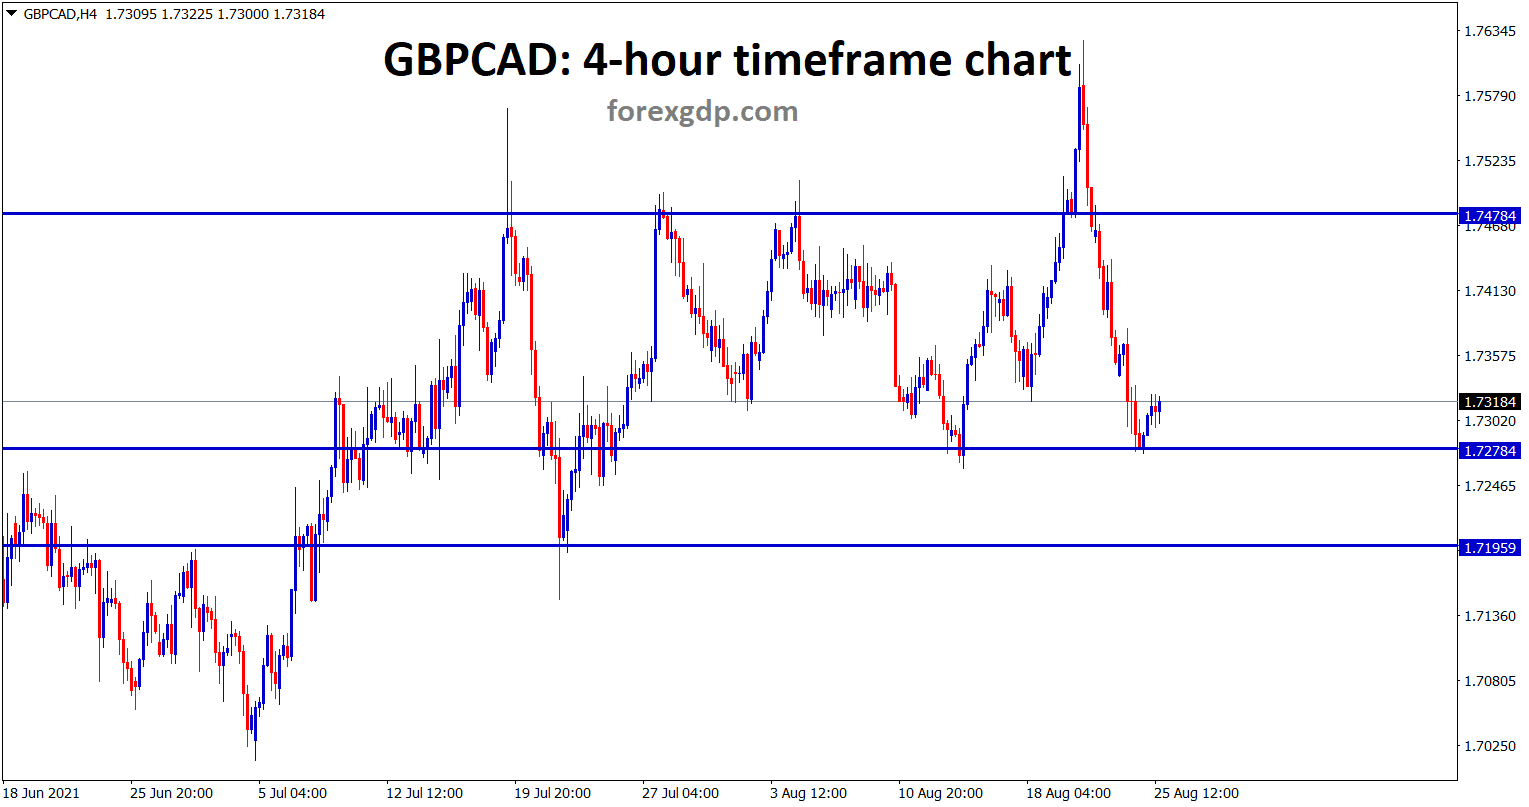 GBPCAD bounces back from the minor support area currently market is ranging